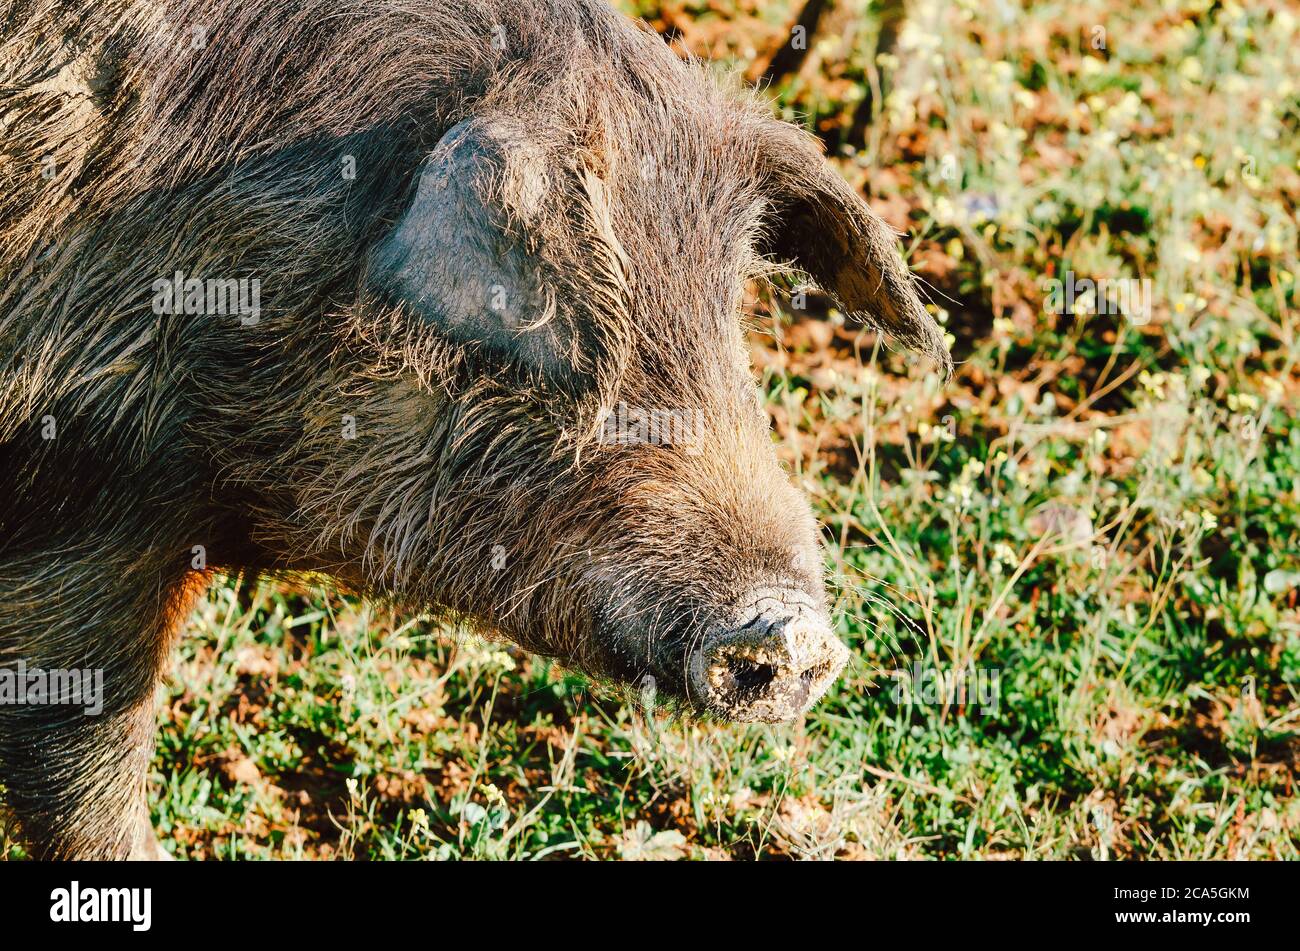 Close up portrait of iberican pig Stock Photo